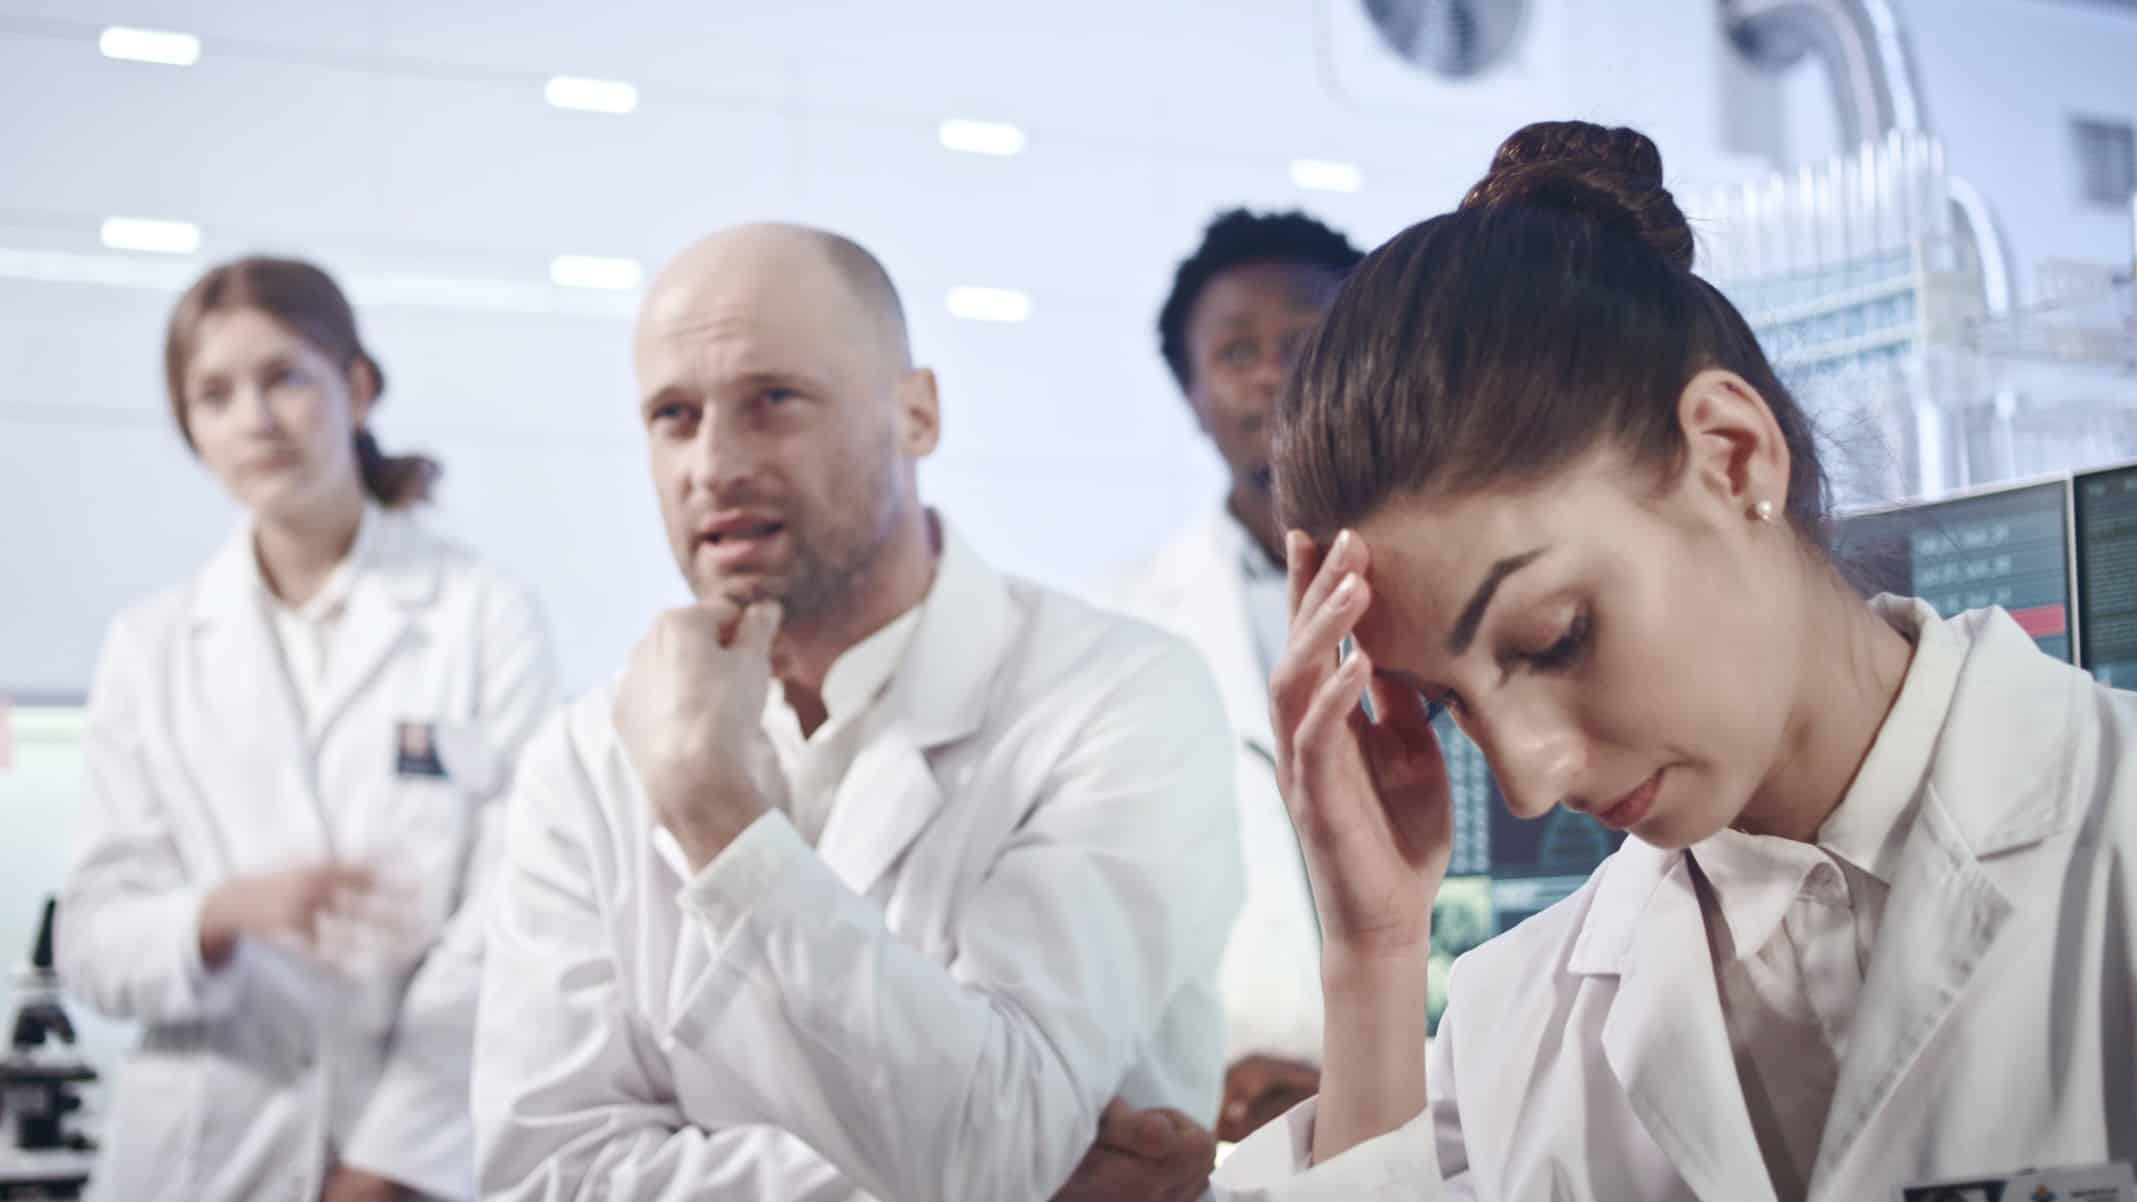 Scientists in white coats look disappointed